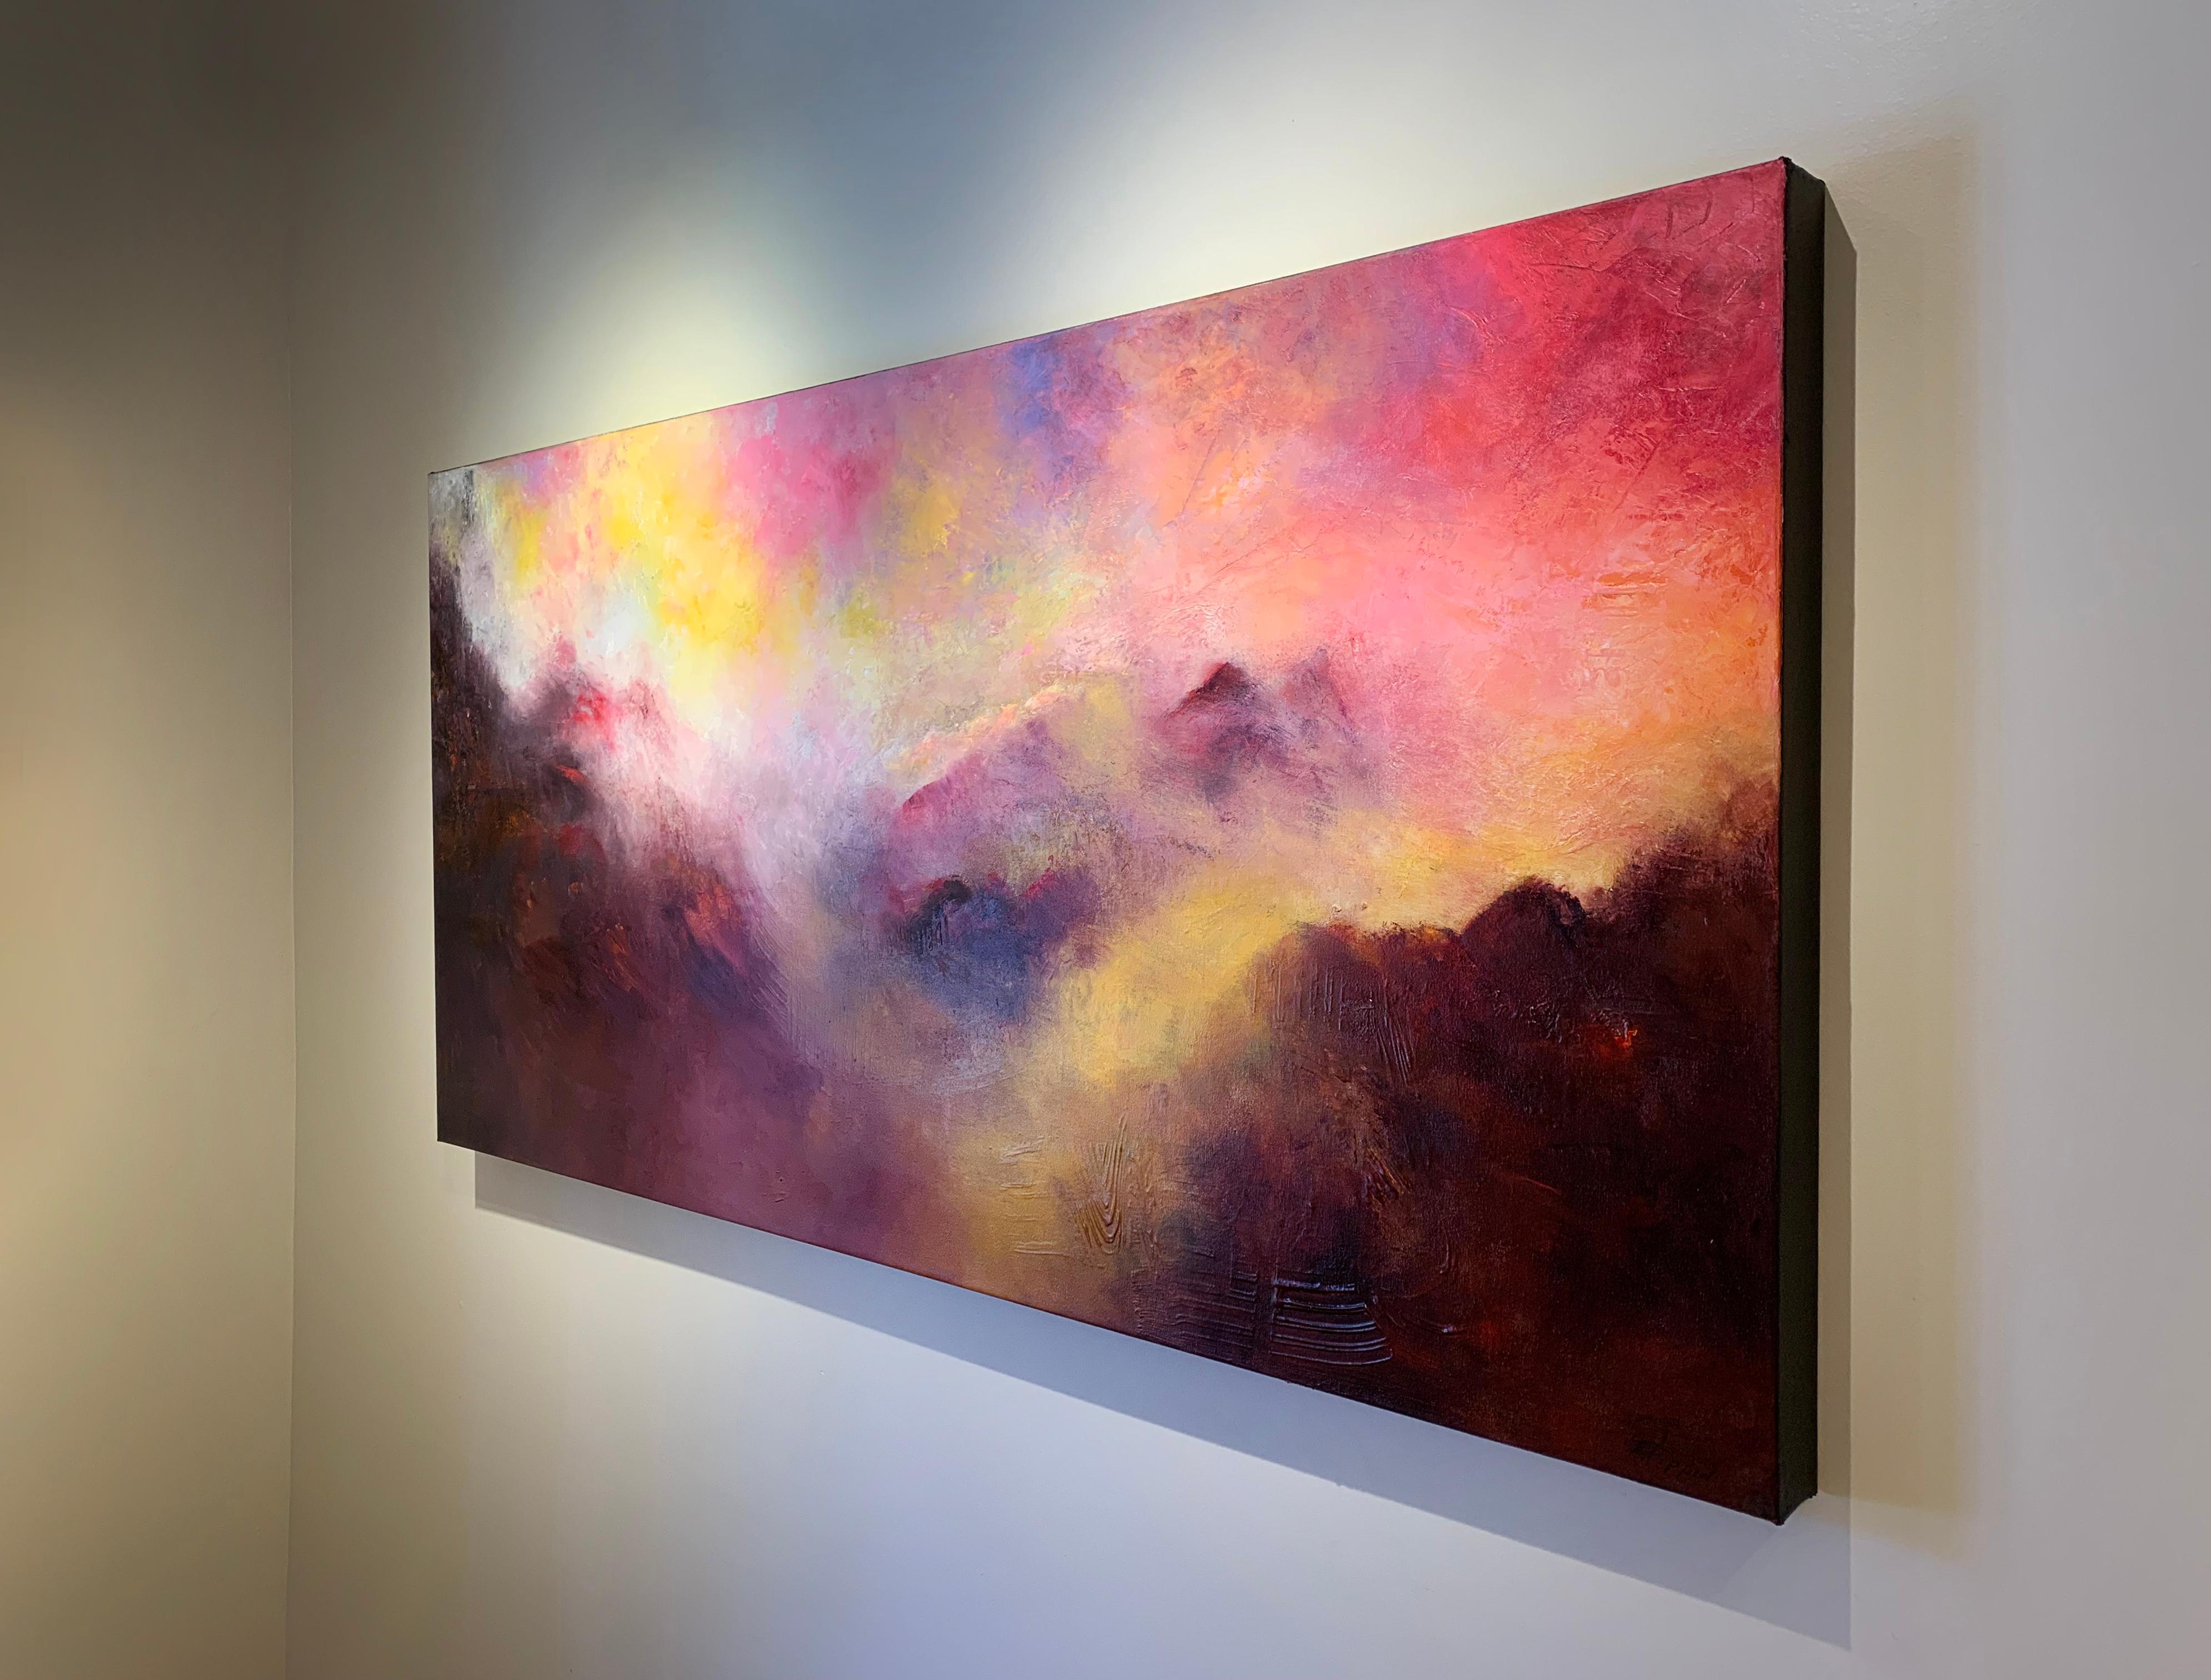 Nature's Glow - a sense of mystery shrouds this mountain landscape - Painting by Aleta Pippin